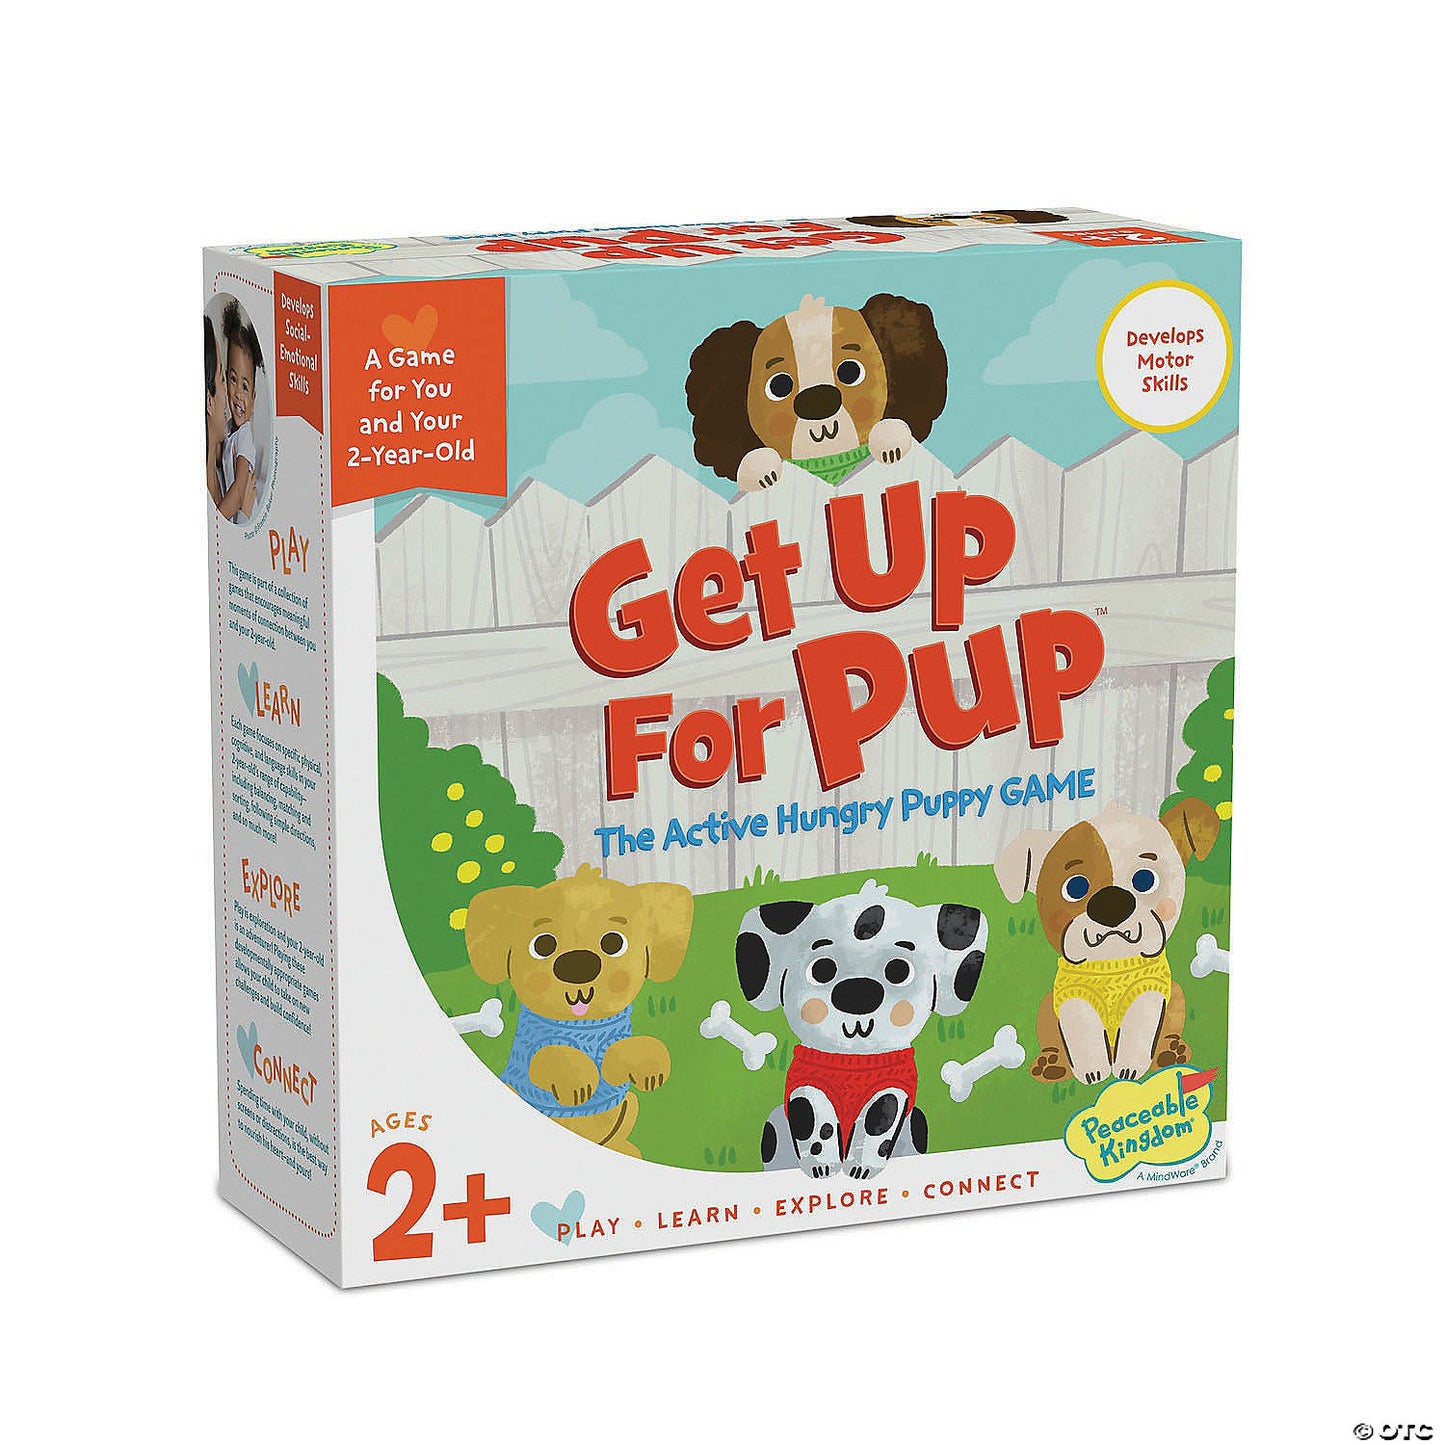 GET UP FOR PUP